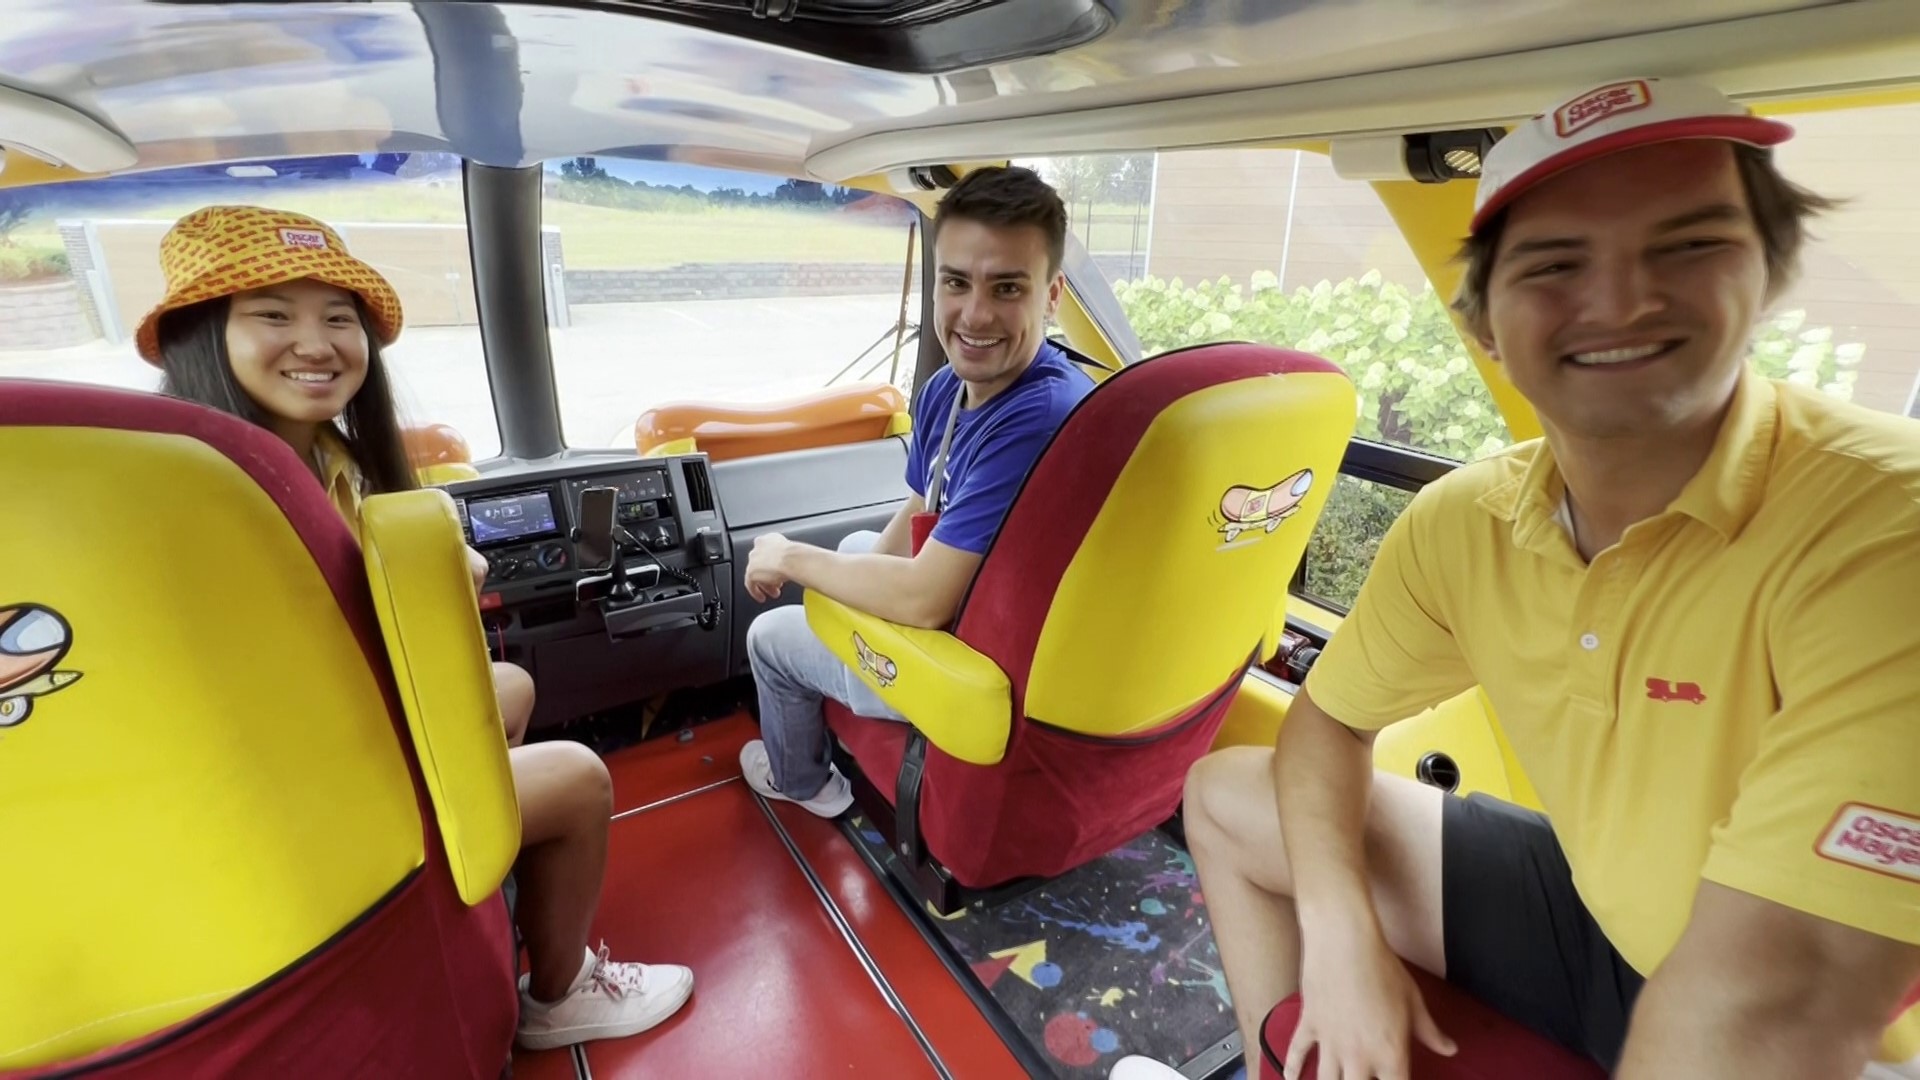 5NEWS Chief Meteorologist Matt Standridge got to live out his dreams and relish the moment as we took a ride in the iconic Oscar Mayer Wienermobile.